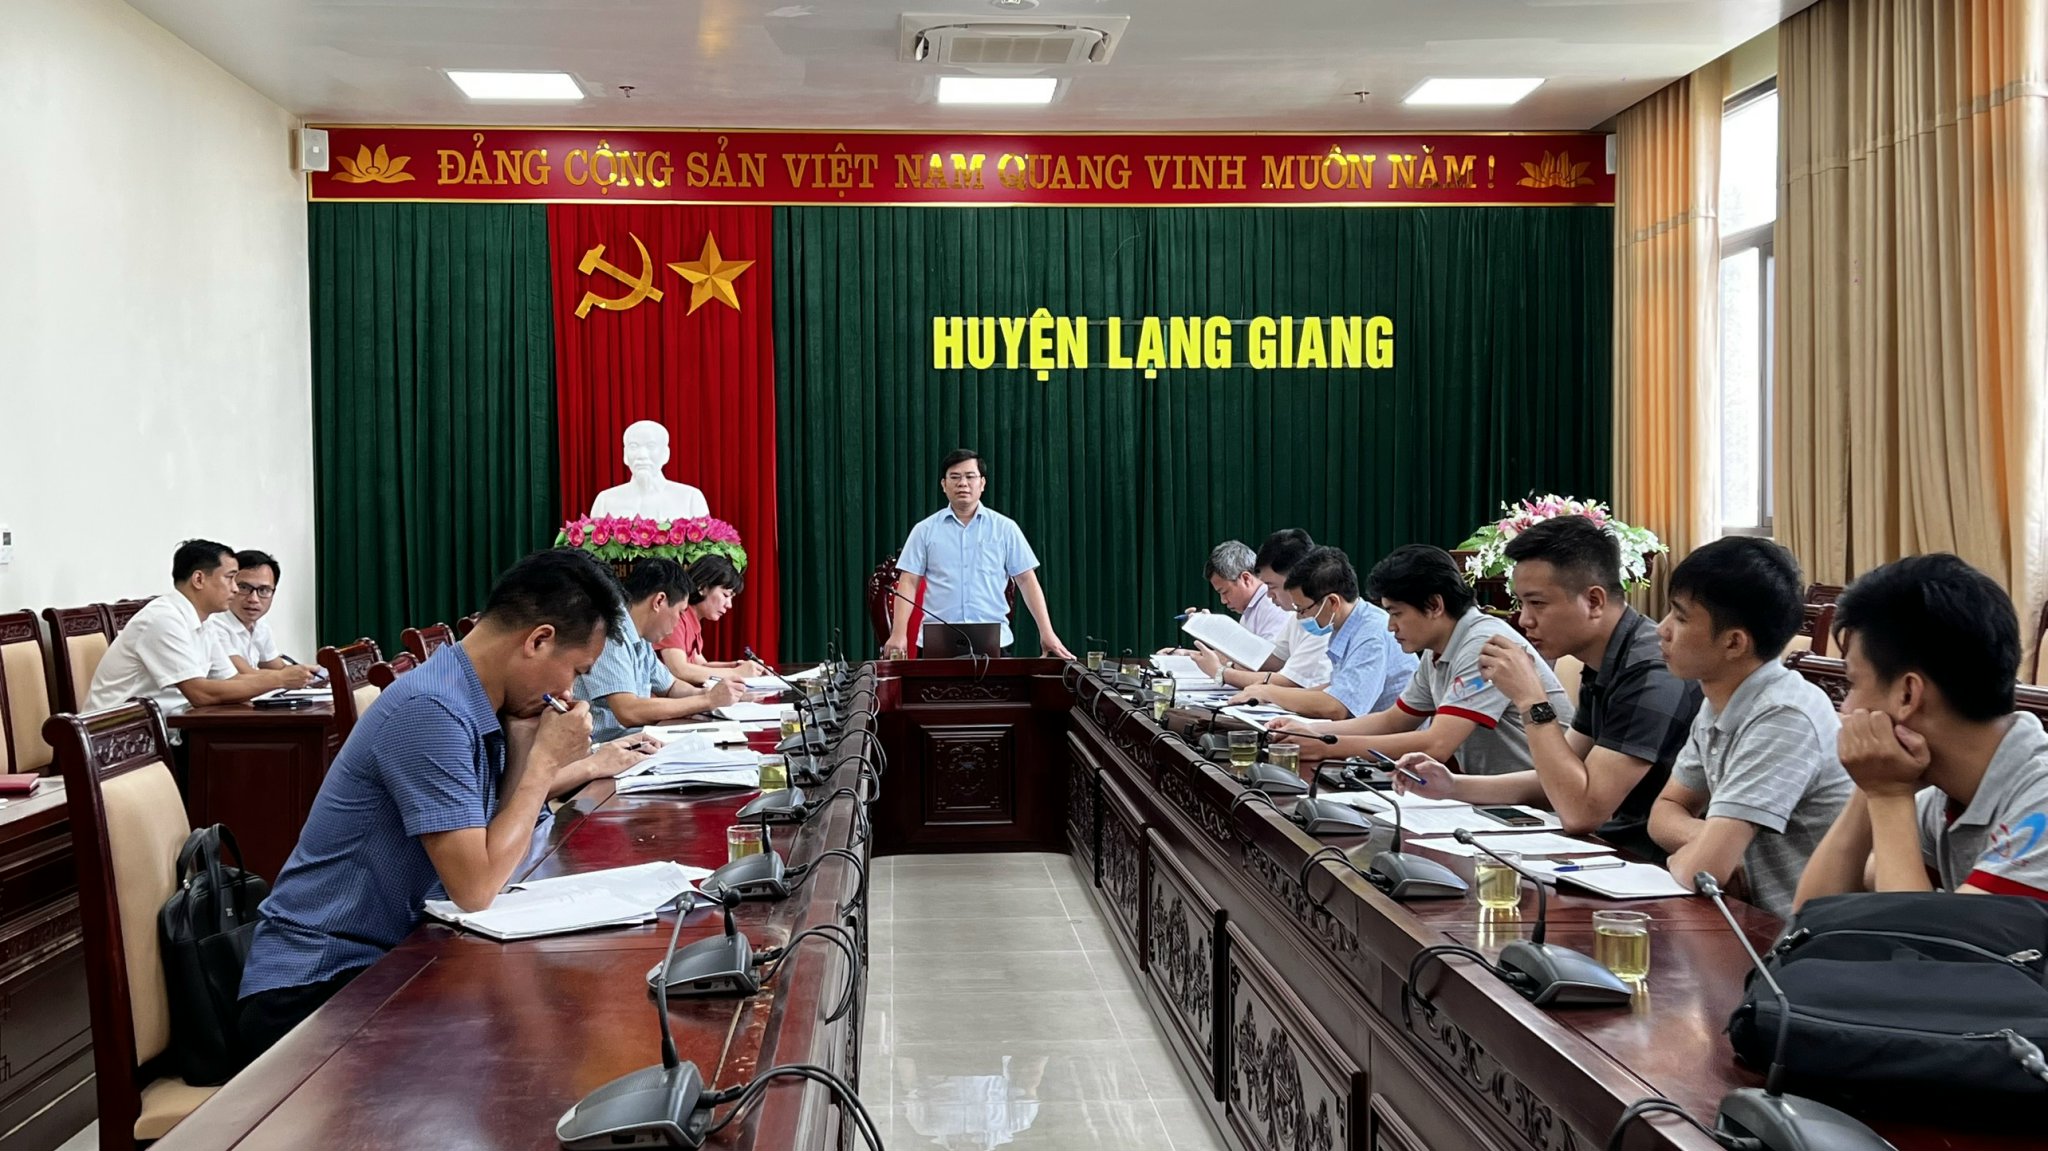 Bac Giang’s VILG Management Board inspects project implementation in the districts|https://stnmt.bacgiang.gov.vn/detailed-news/-/asset_publisher/u427aQT80iO6/content/bac-giang-s-vilg-management-board-inspects-project-implementation-in-the-districts